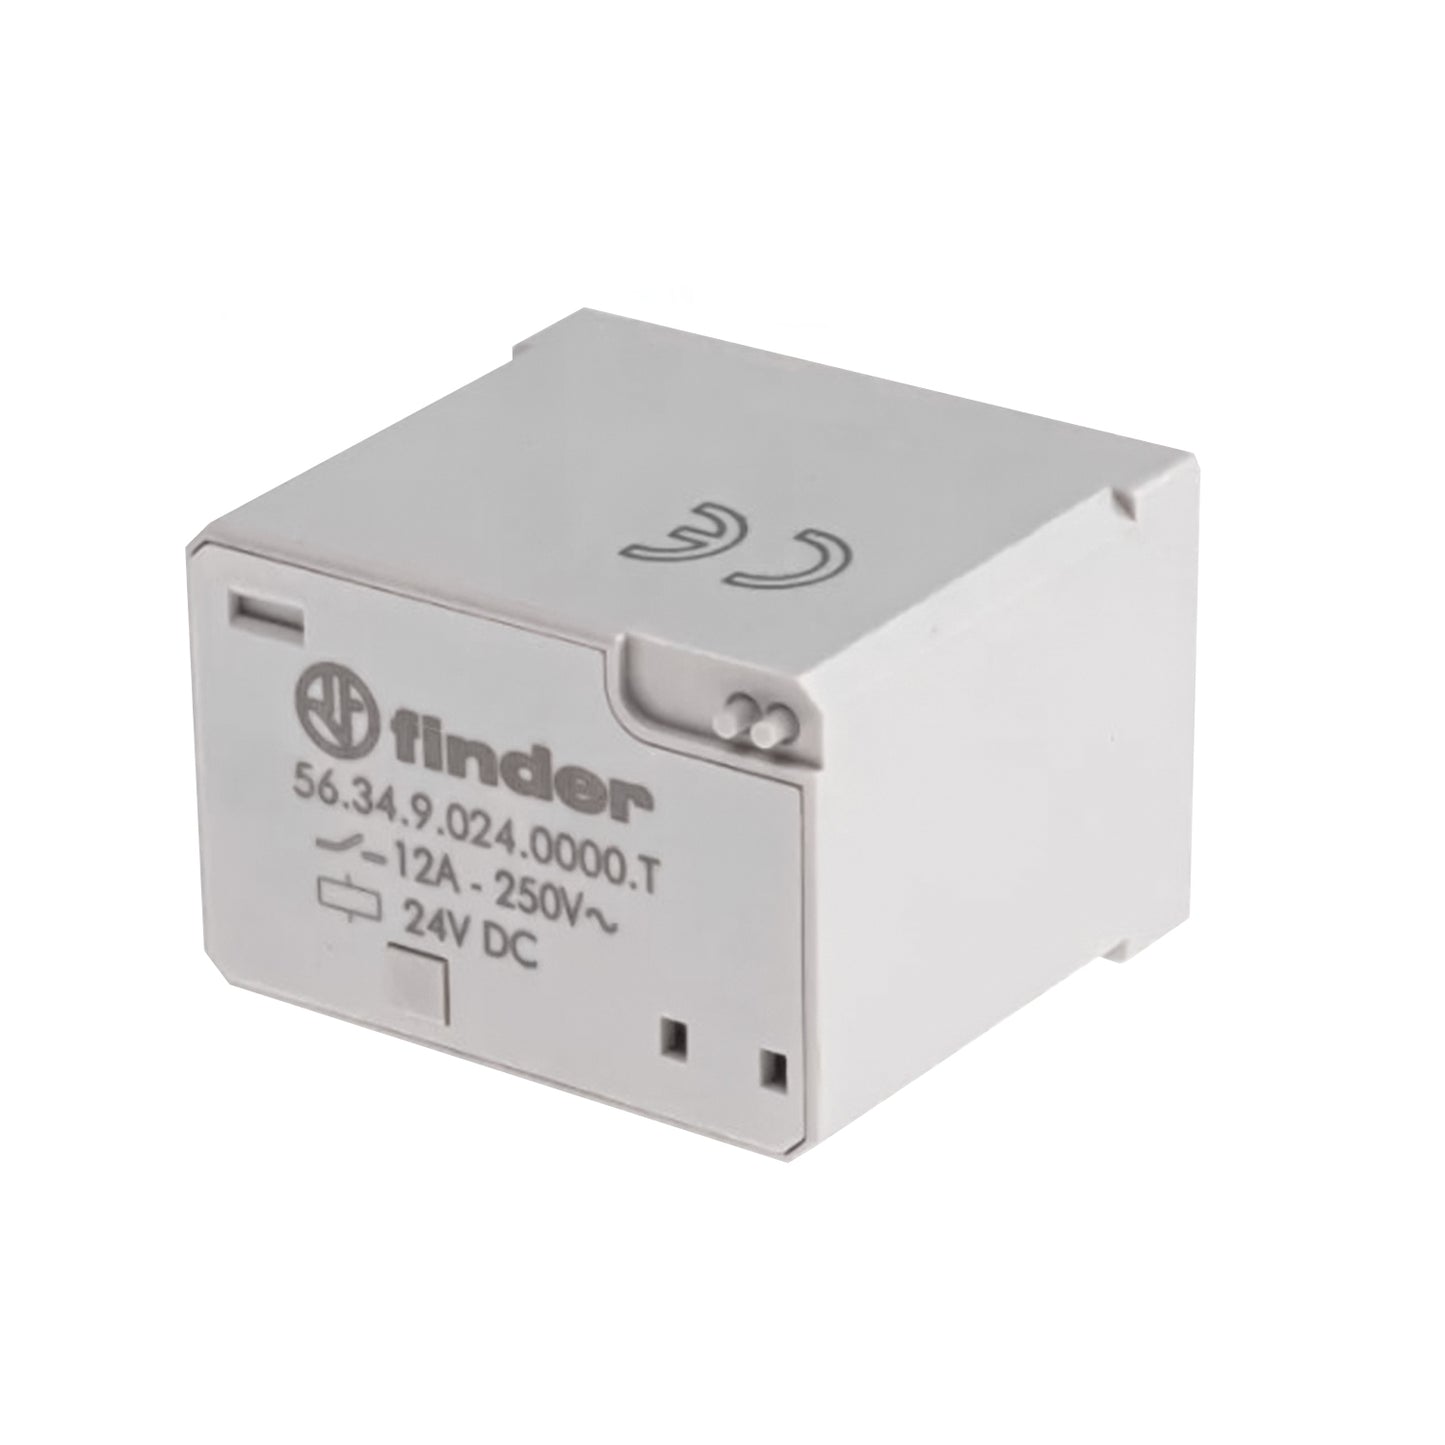 Finder Series 56 Power relay 4 switches 12A 24V DC 56.34.9.024.0000.T